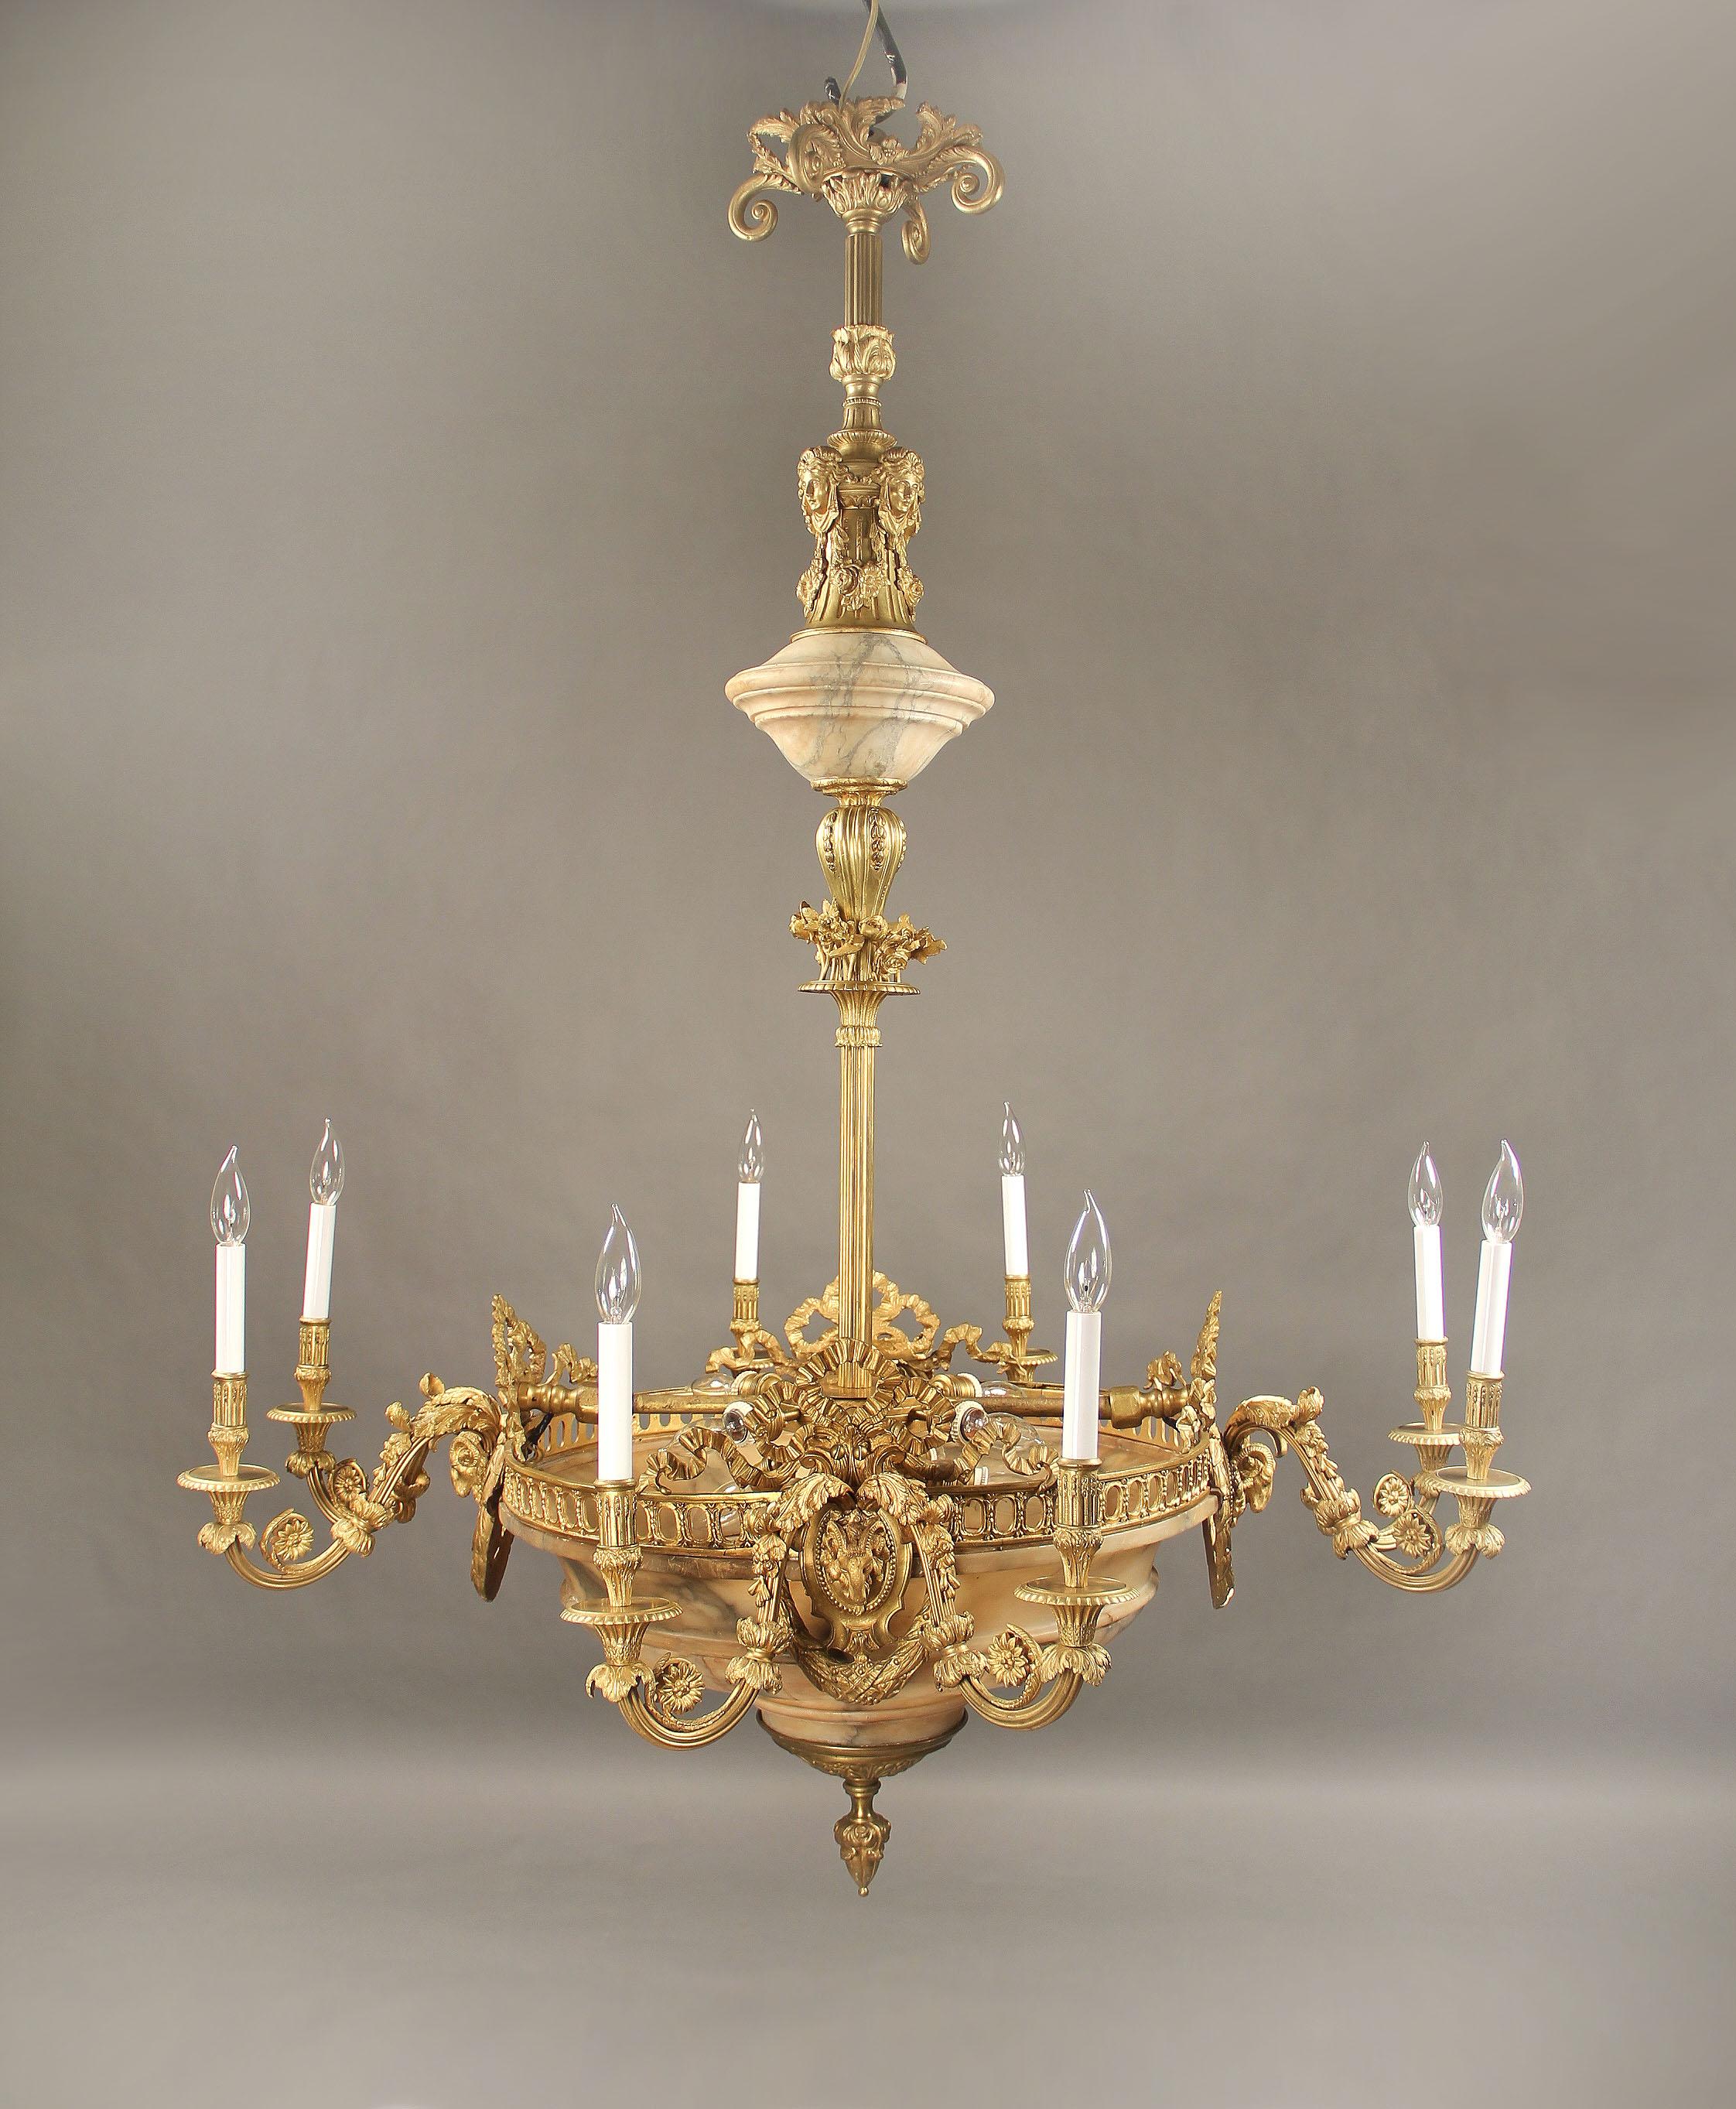 A Nice Late 19th Century Gilt Bronze and Alabaster 16 Light Chandelier

Bronze casted with an alabaster bowl, each set of arms centered with a rams heads, flowers and bows. Bronze female masks along the top.  Eight perimeter and eight interior